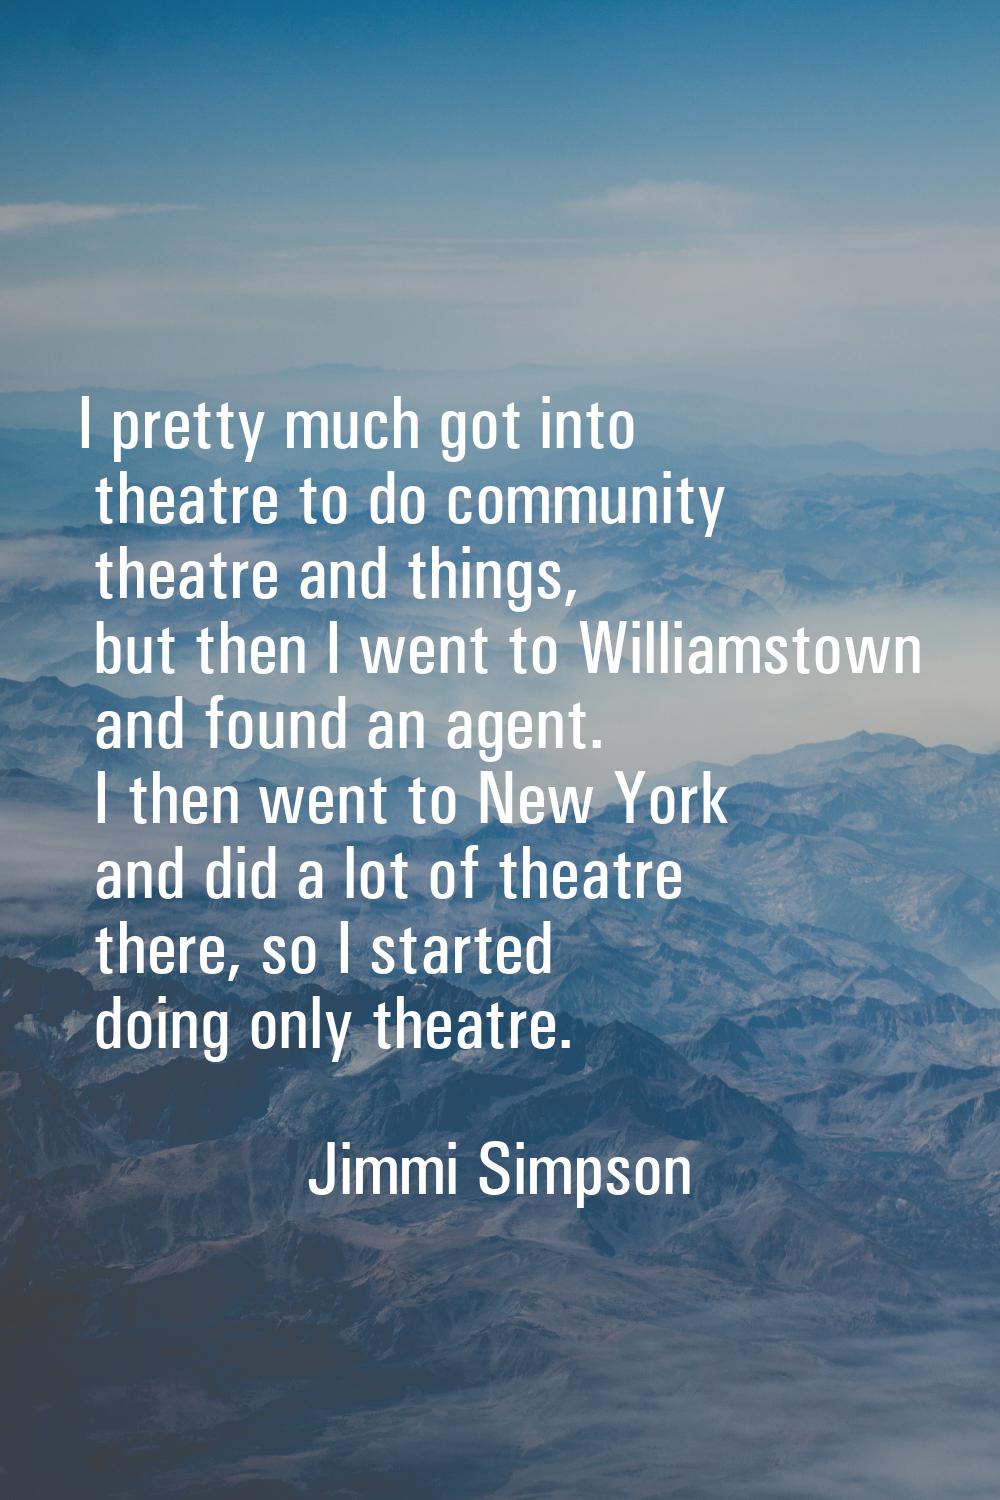 I pretty much got into theatre to do community theatre and things, but then I went to Williamstown 